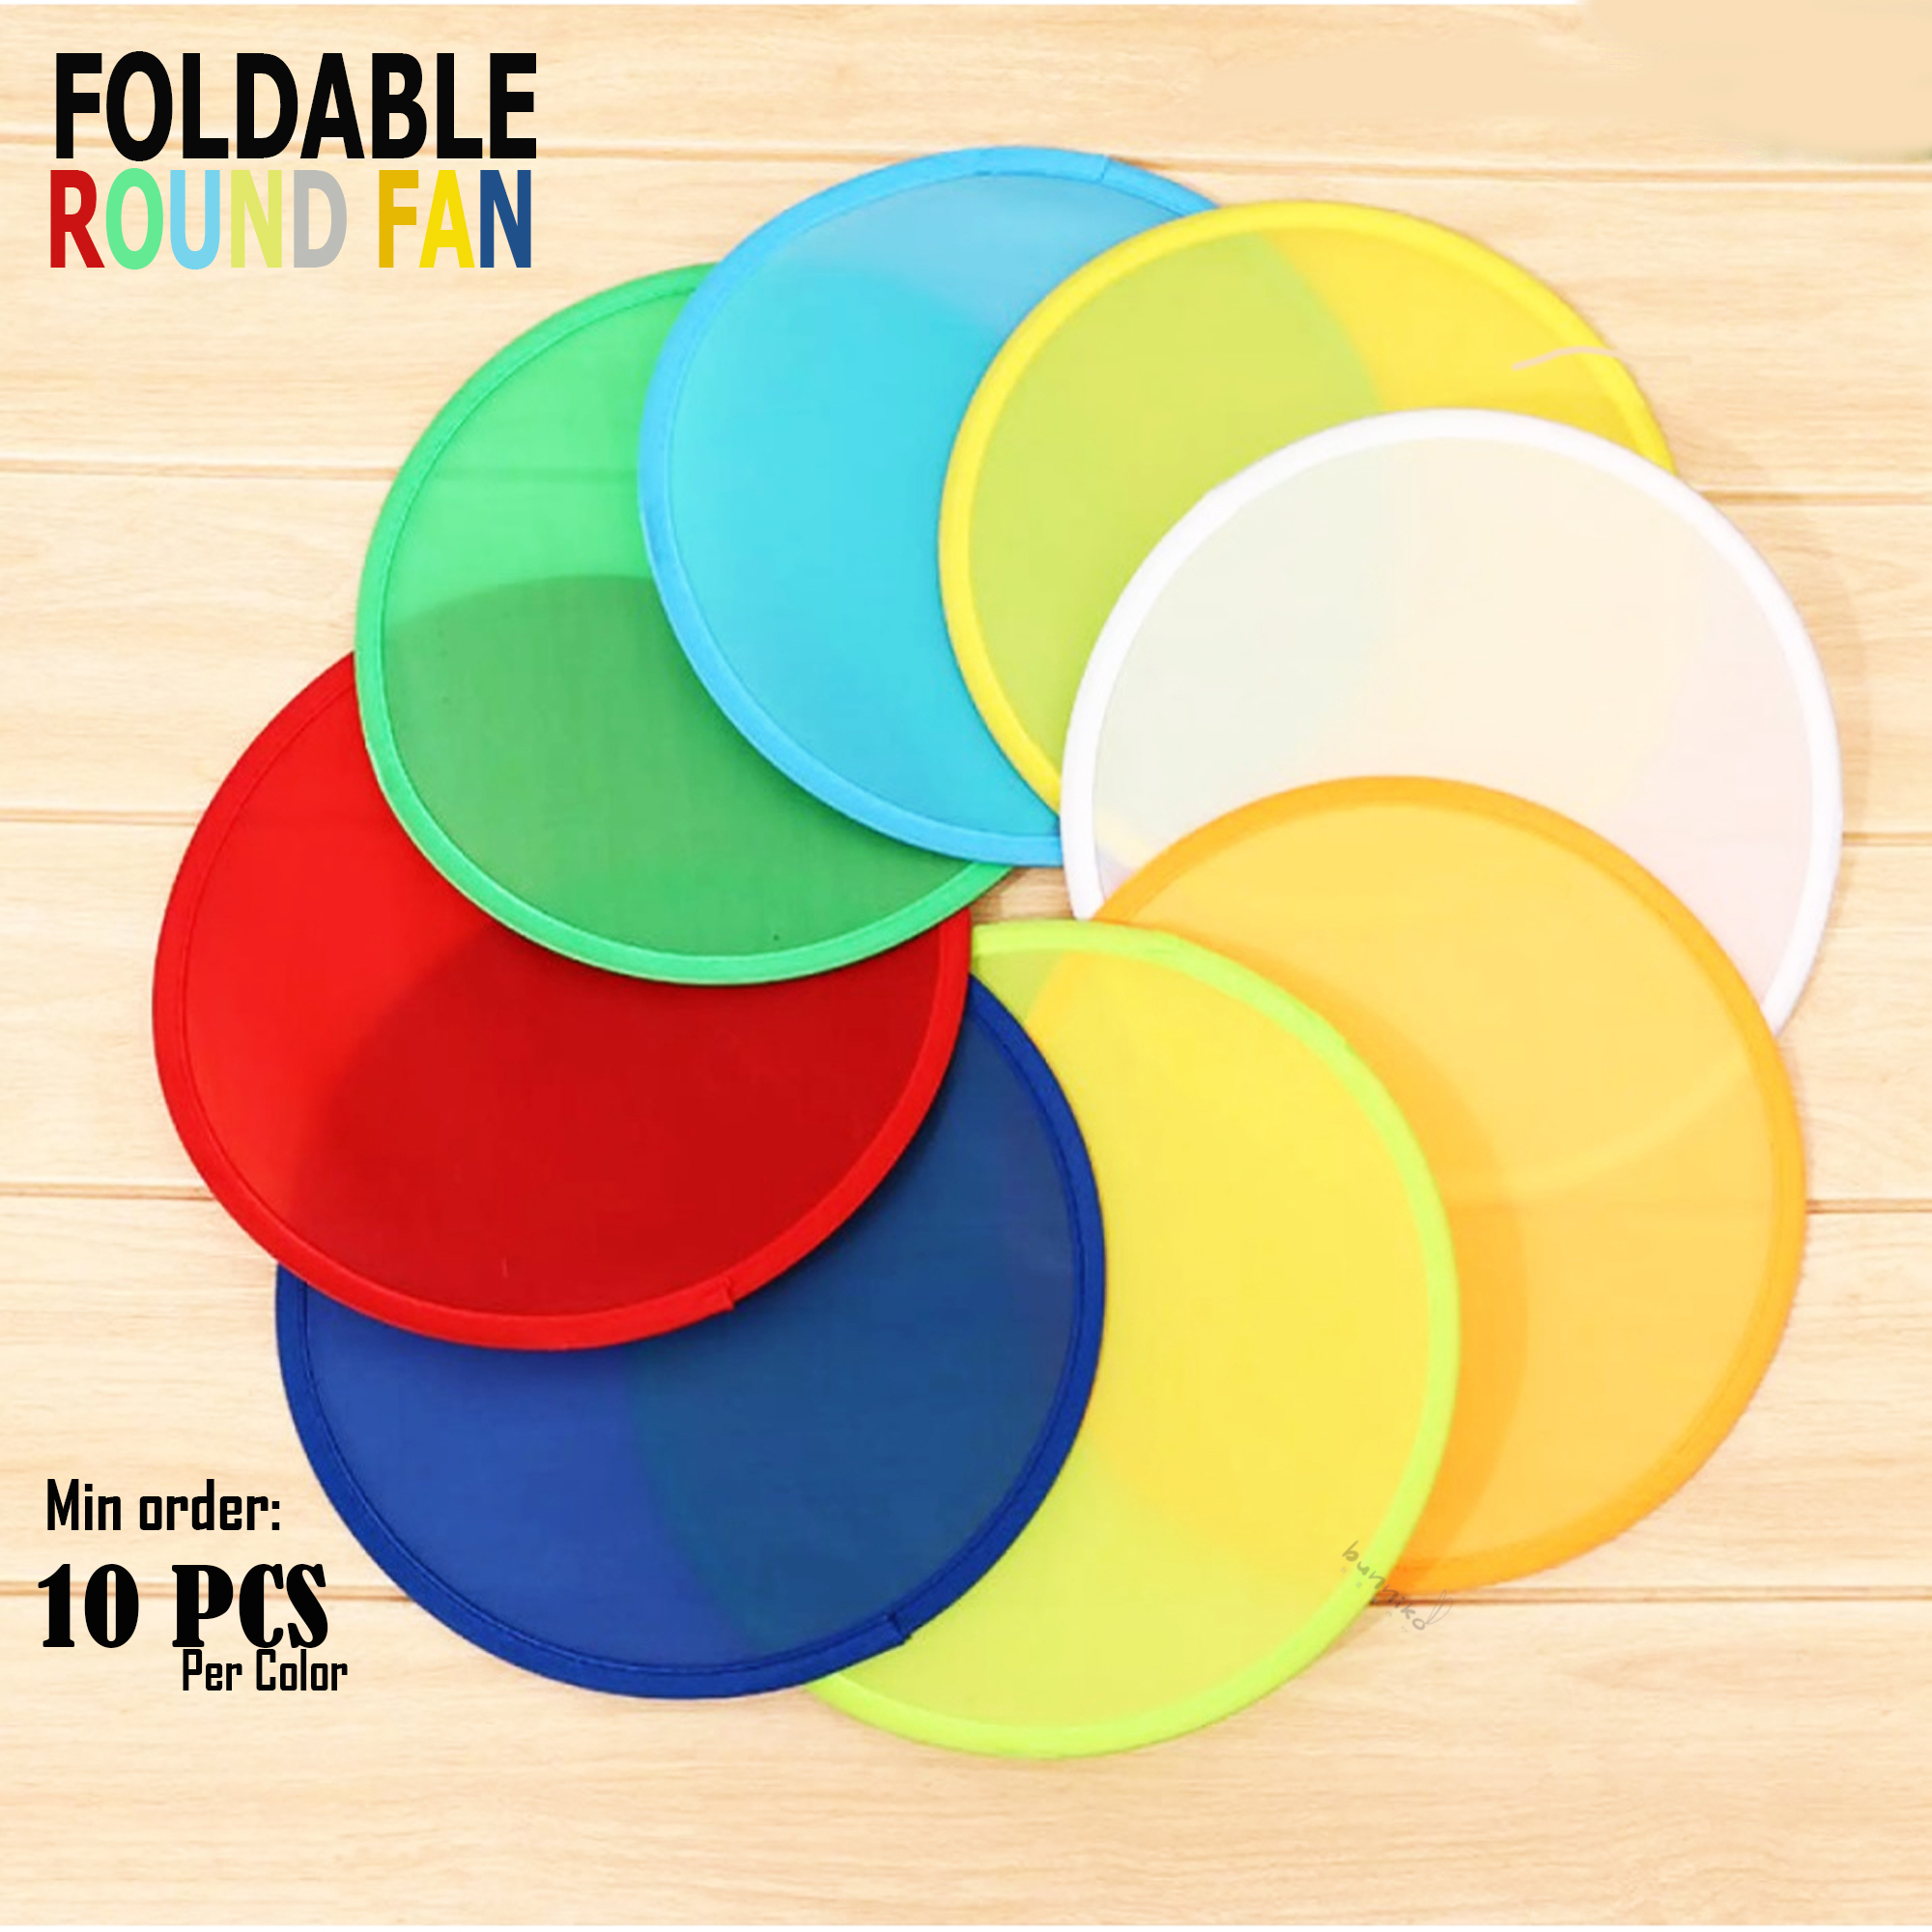 10PCS 1PC Foldable Round Fan Plain Full Colored Colorful Nylon Mini Round  Disc Folding Portable Pocket Frisbee with Pouch Storage Case Handheld  Twistable Circle Sublimation Hand Fans Paypay Pamaypay Printable Company  Events